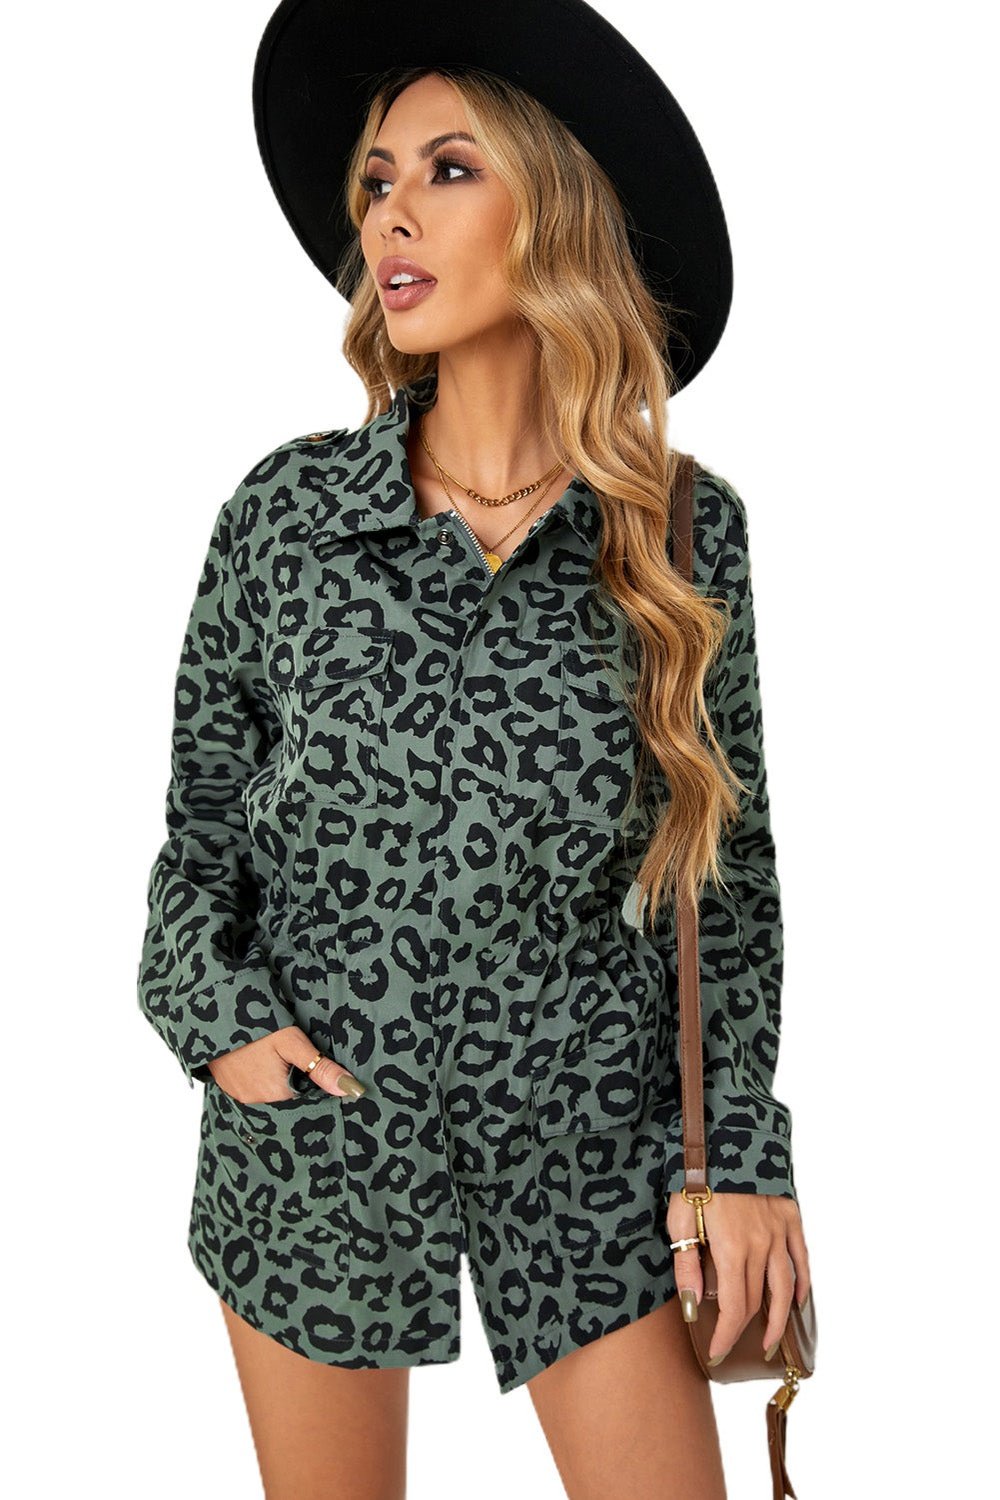 Leopard Drawstring Waist Jacket with Pockets - Jackets - FITGGINS